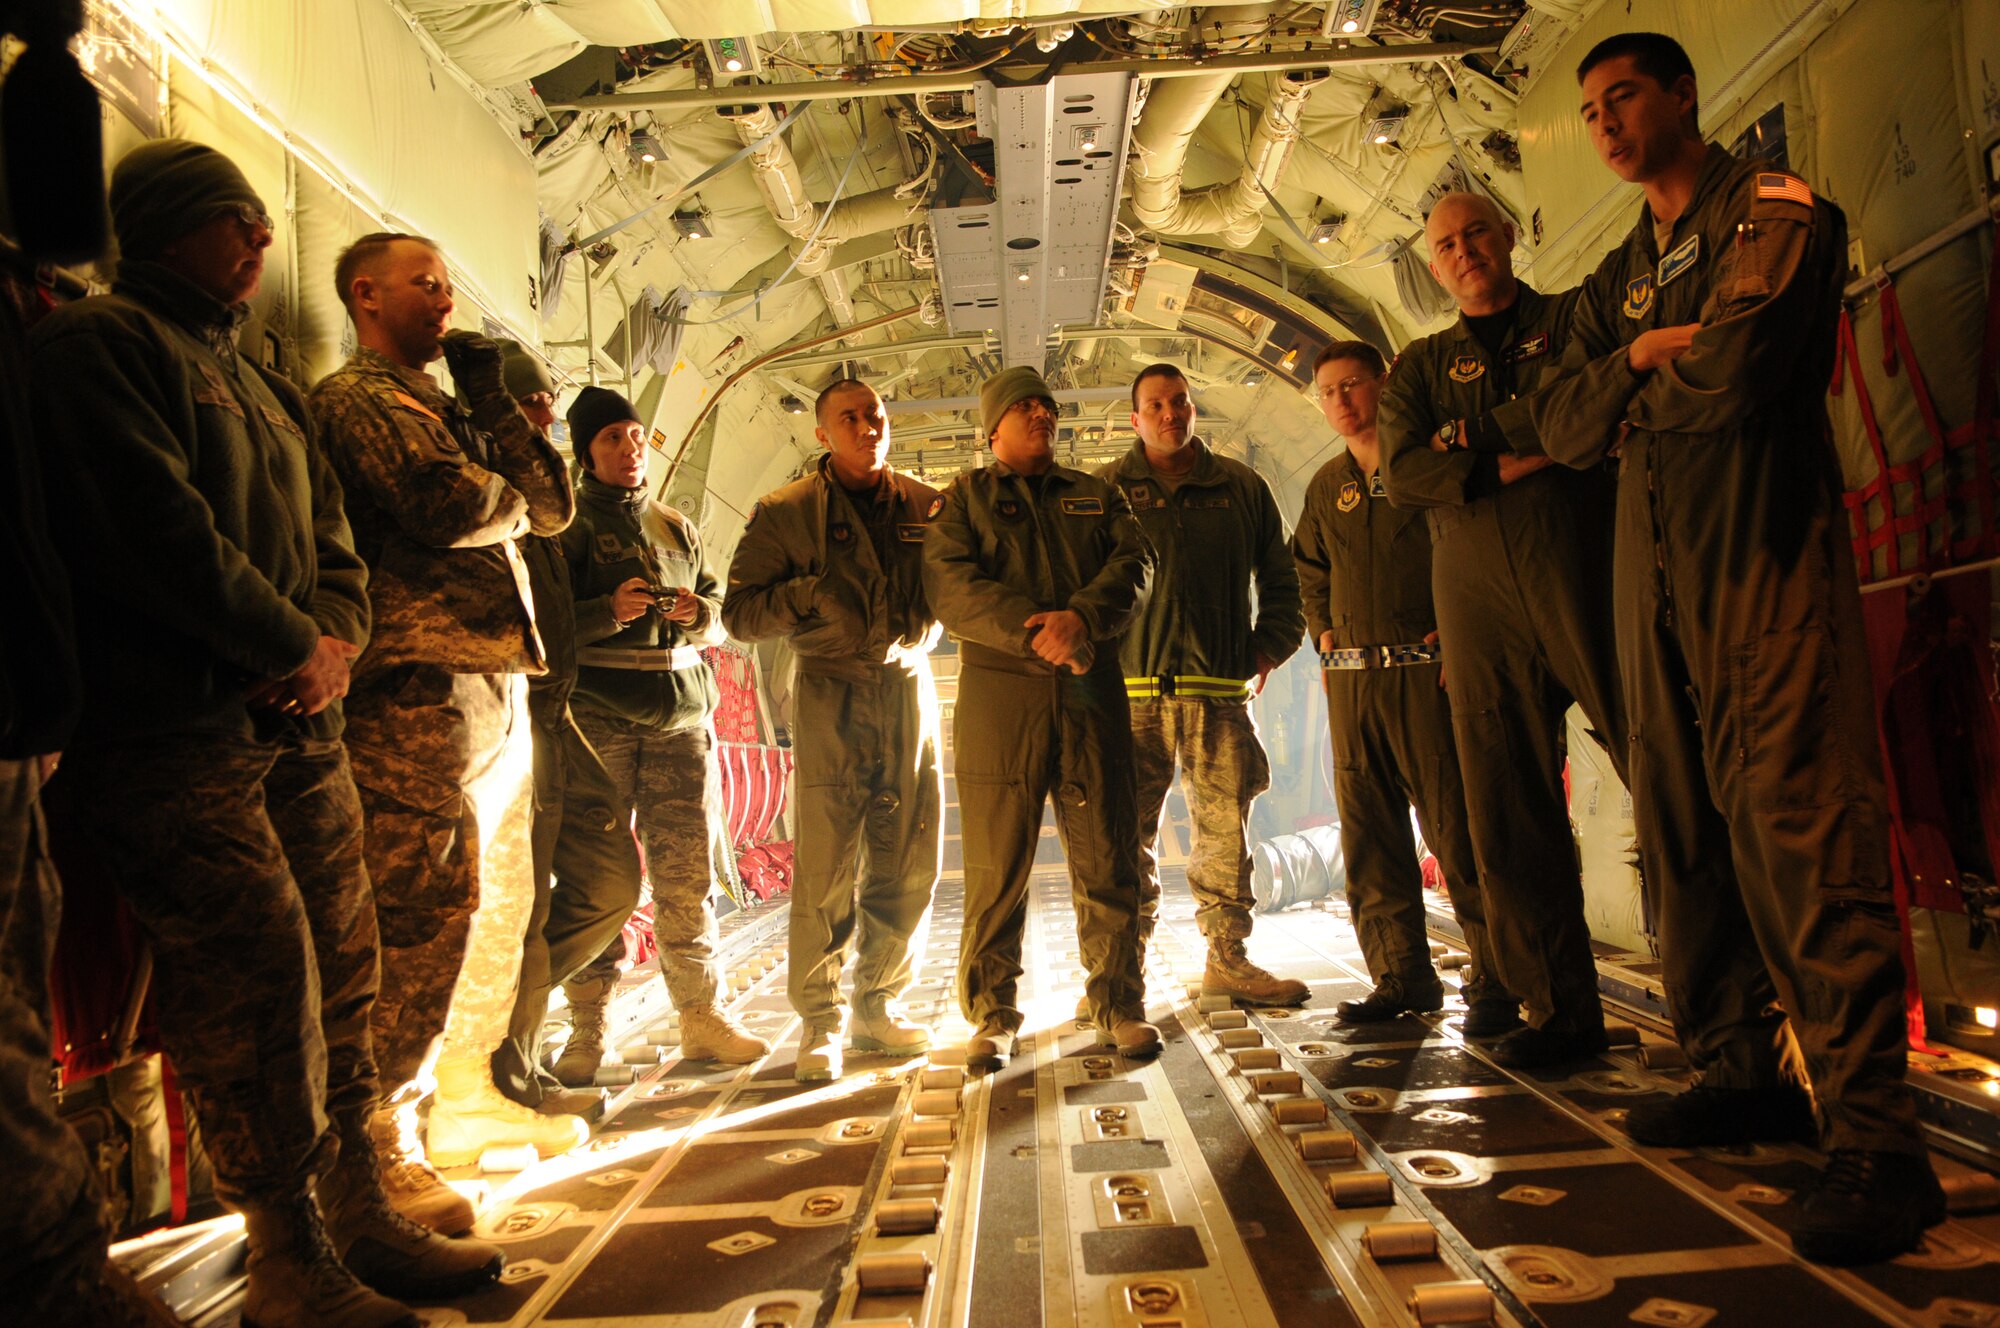 RAMSTEIN AIR BASE, Germany -- Capt. John Huntsman (far right), 37th Airlift Wing aircraft commander, gives a preflight briefing to the crew and passengers of a C-130J Super Hercules before departing to support the response to wildfires near Haifa, Israel, Dec. 4. U.S. Air Forces in Europe is the lead component to airlift 20 tons of fire retardant to Israel for the U.S. European Command's support effort. EUCOM routinely provides foreign humanitarian assistance in response to crises in the region in the same manner as other regional partners. (U.S. Air Force photo/Staff Sgt. Benjamin Wilson)